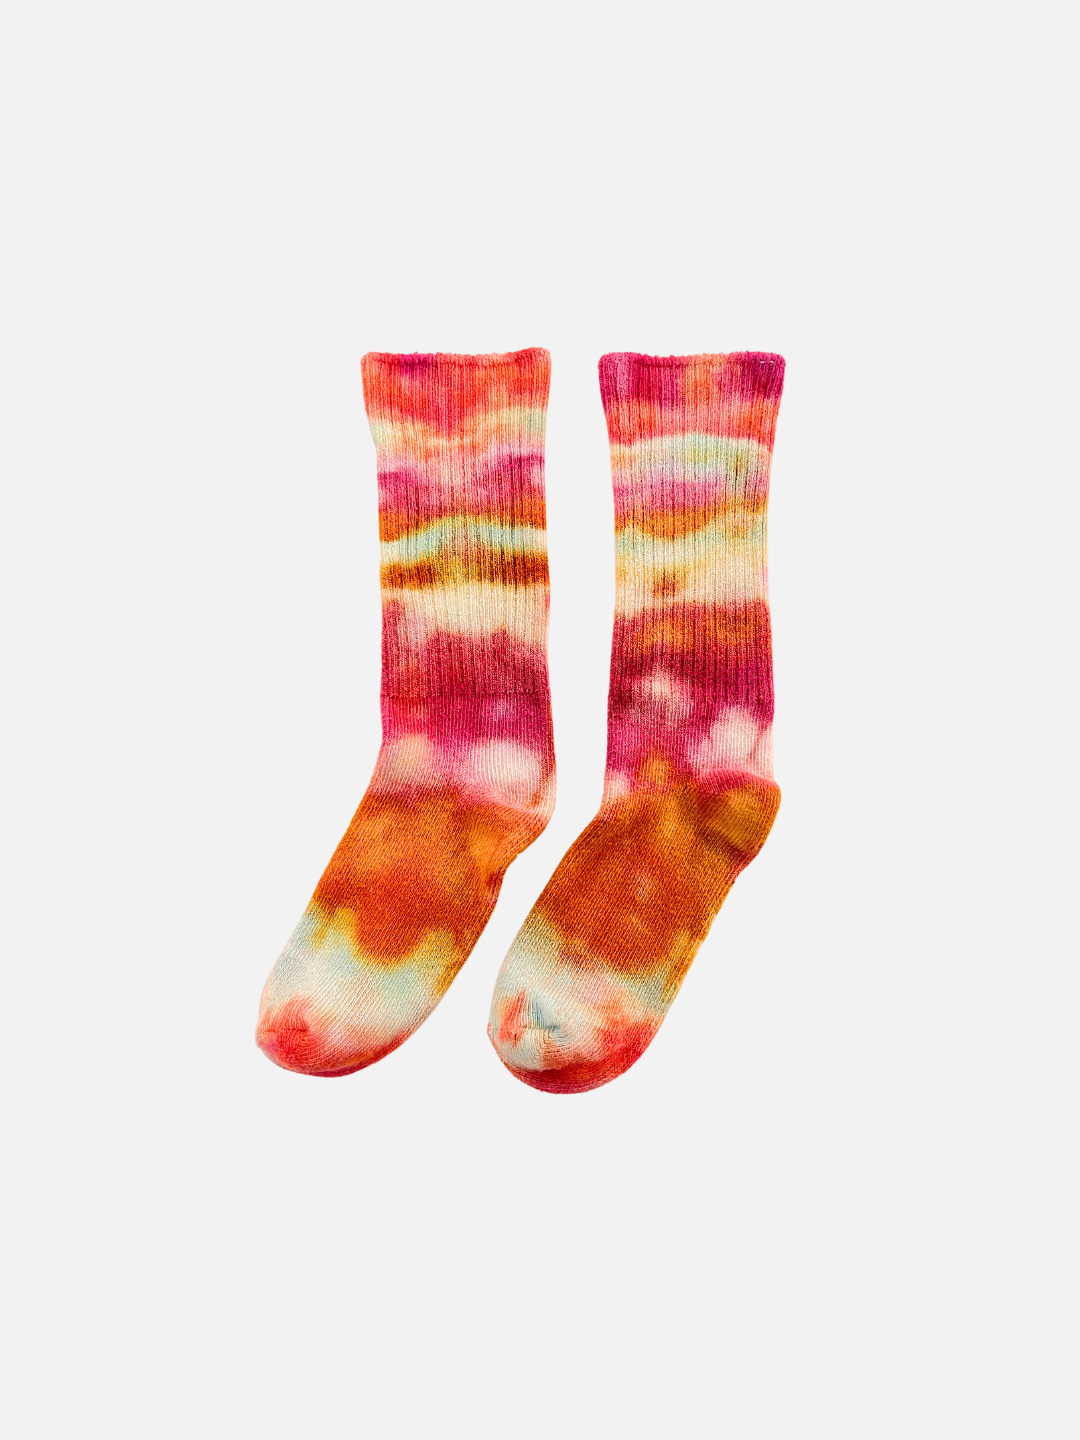 Golden Hour | A pair of kids' ankle socks in dappled shades of orange and pink